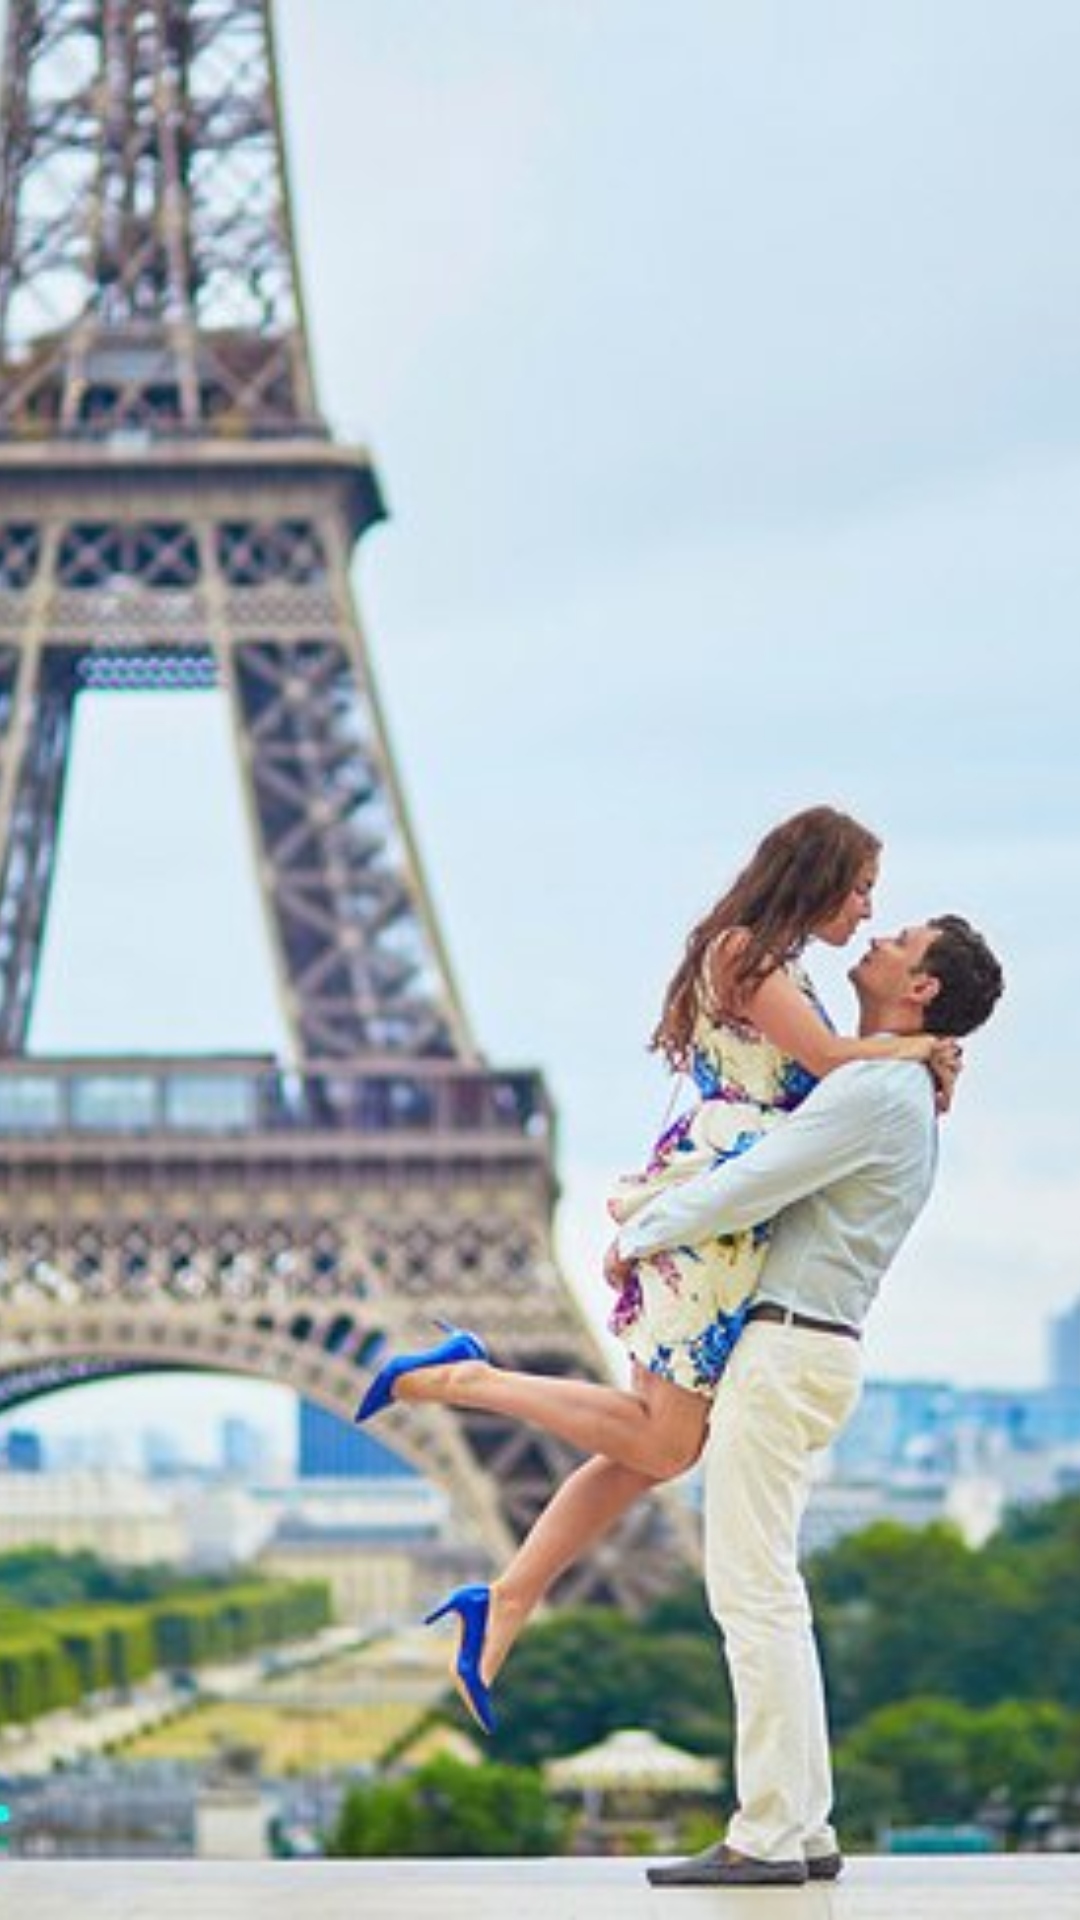 5 most romantic countries in the world